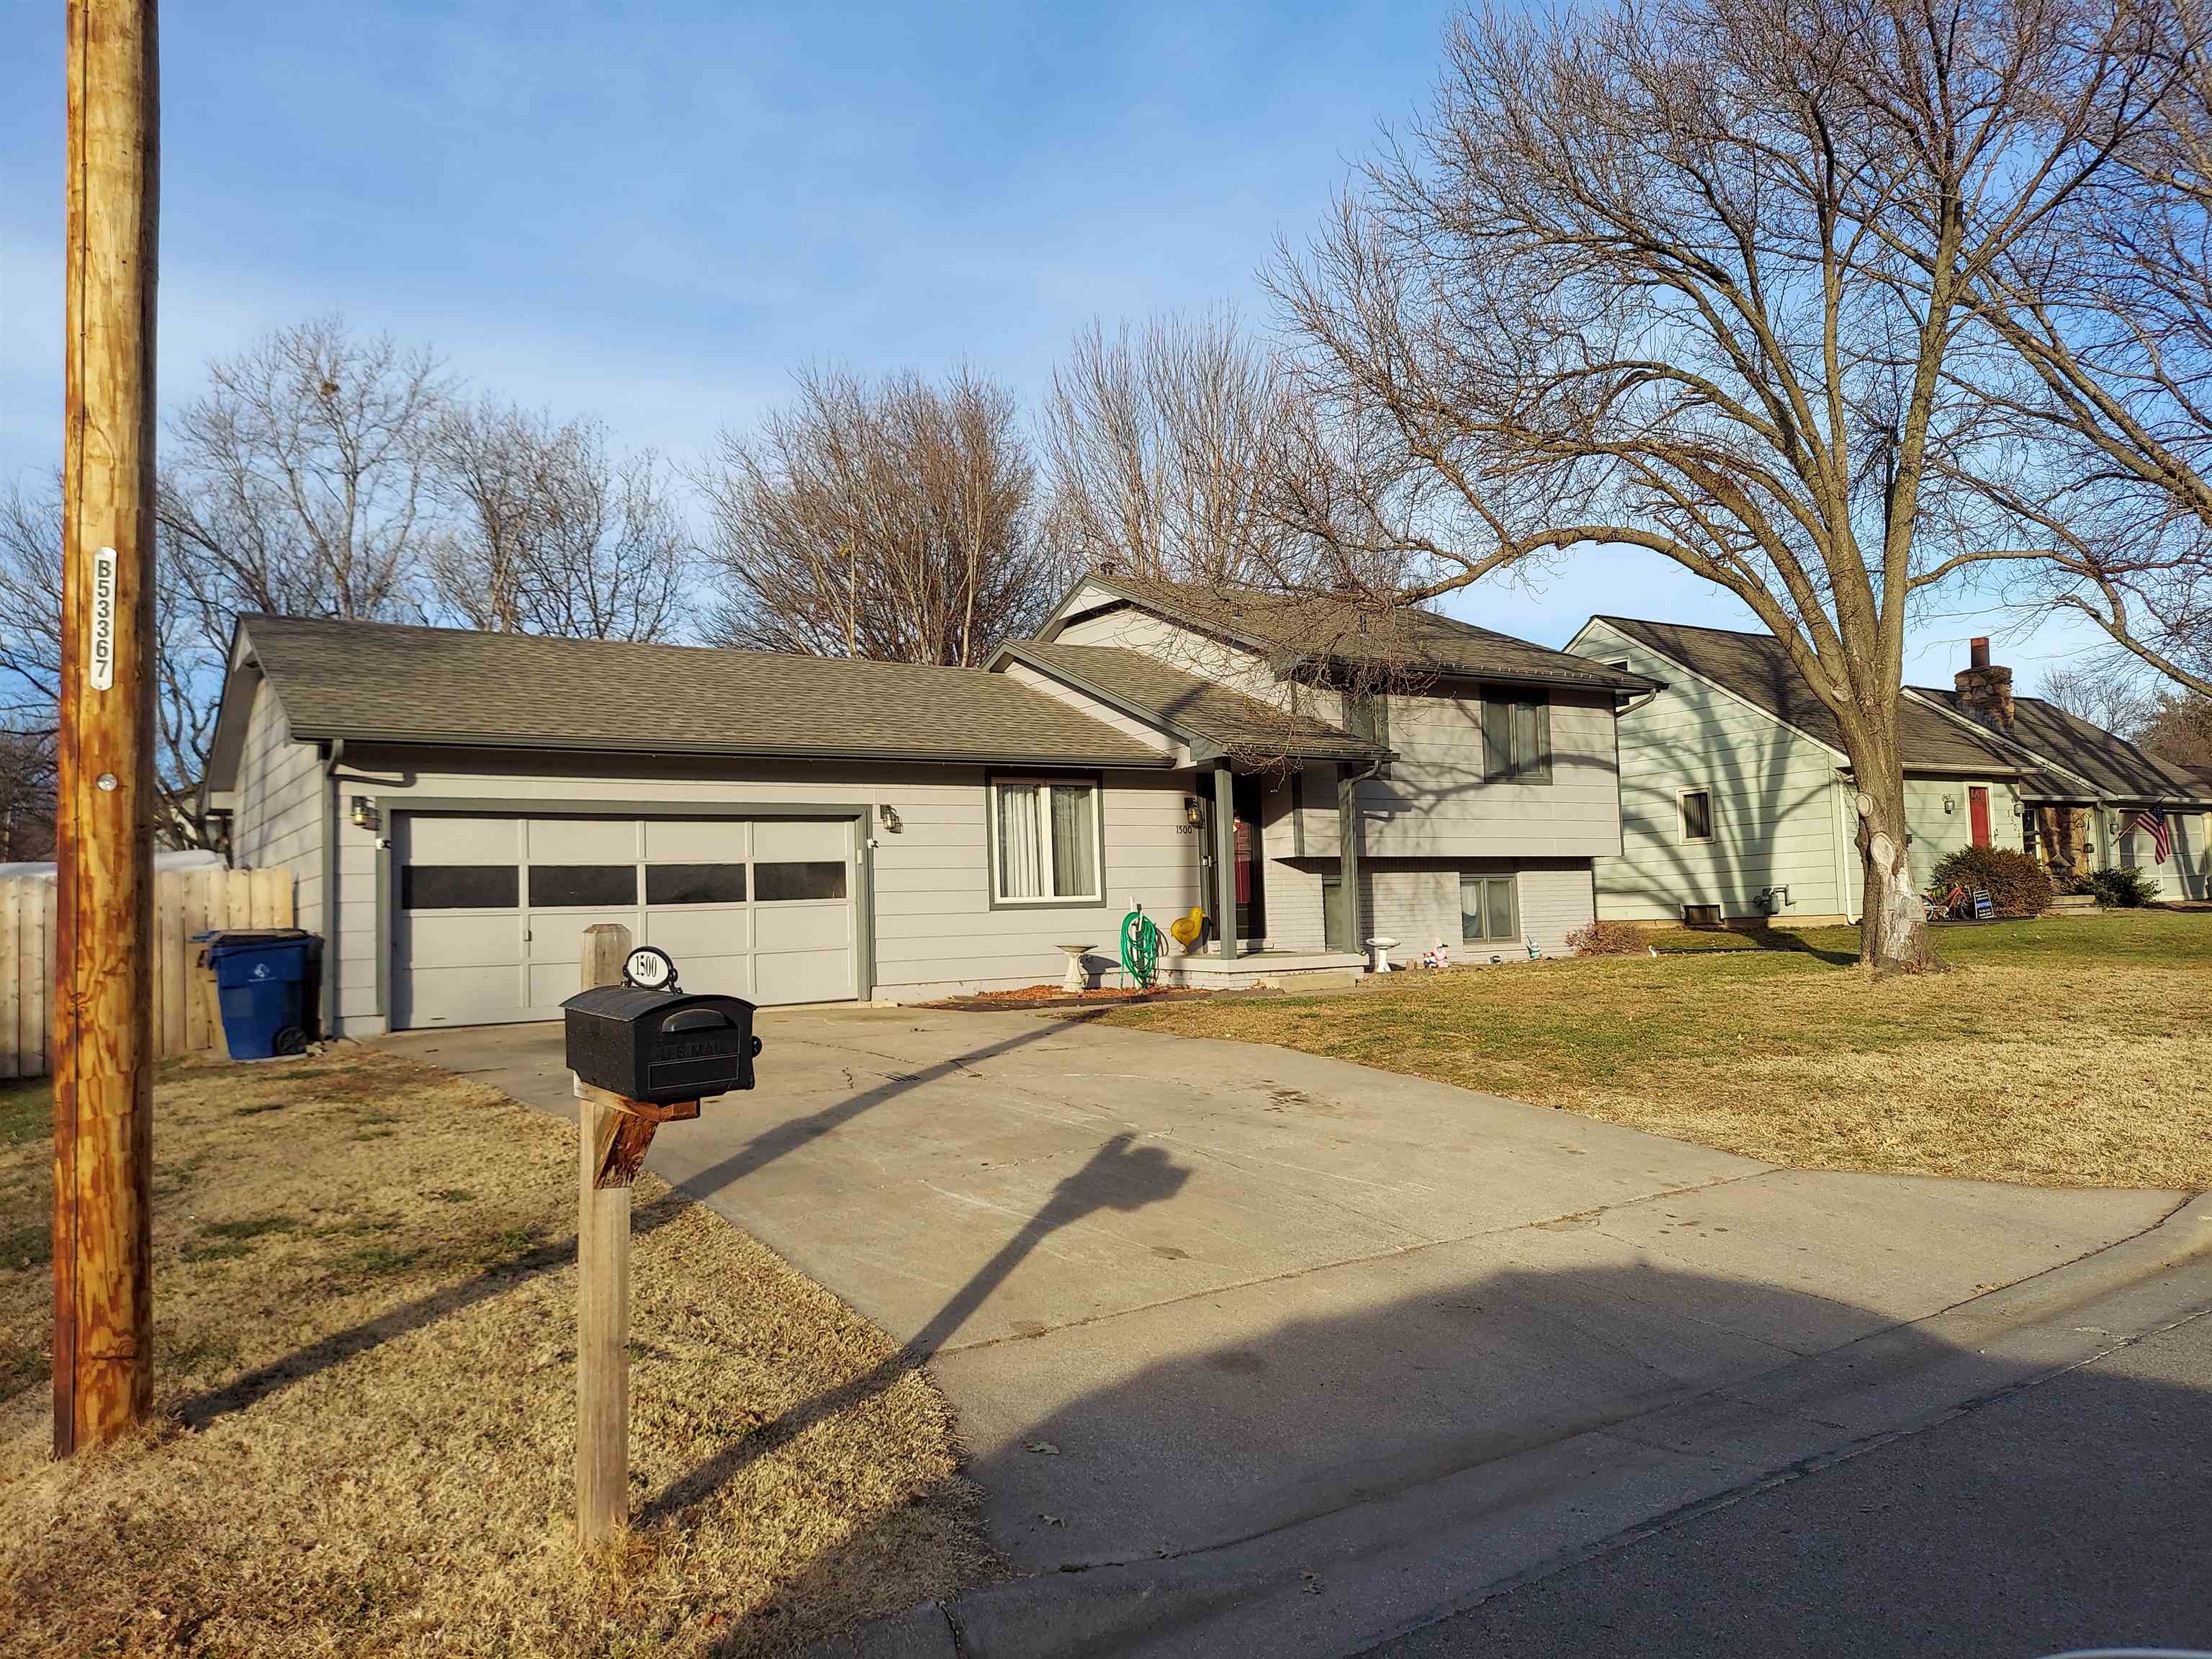 Beautiful Quad-Level home in Derby Ks just waiting for a new family. Very well maintained and has one year old exterior paint, new interior paint. New carpet on stairs and new wood laminate throughout. New Roof was installed Nov. 2017. Living room, kitchen & dining on main level. Kitchen freshly painted. All stainless steel appliances stay including washer/dryer. Master plus 2 bedrooms & full bath on upper level. Large Family room in lower level along with bedroom, full bath, laundry with newer washer/dryer to remain with home if Buyer wants them. Basement has finished room, closet, no egress window, would be perfect for play room, office or game room. Fully fenced back yard with above ground pool & new pool pump ready for fun in the sun this next Summer. Back yard also has covered patio and large gate for easy access. Located in Beautiful established neighborhood in Derby Ks, you won't be disappointed, schedule your showing TODAY!!